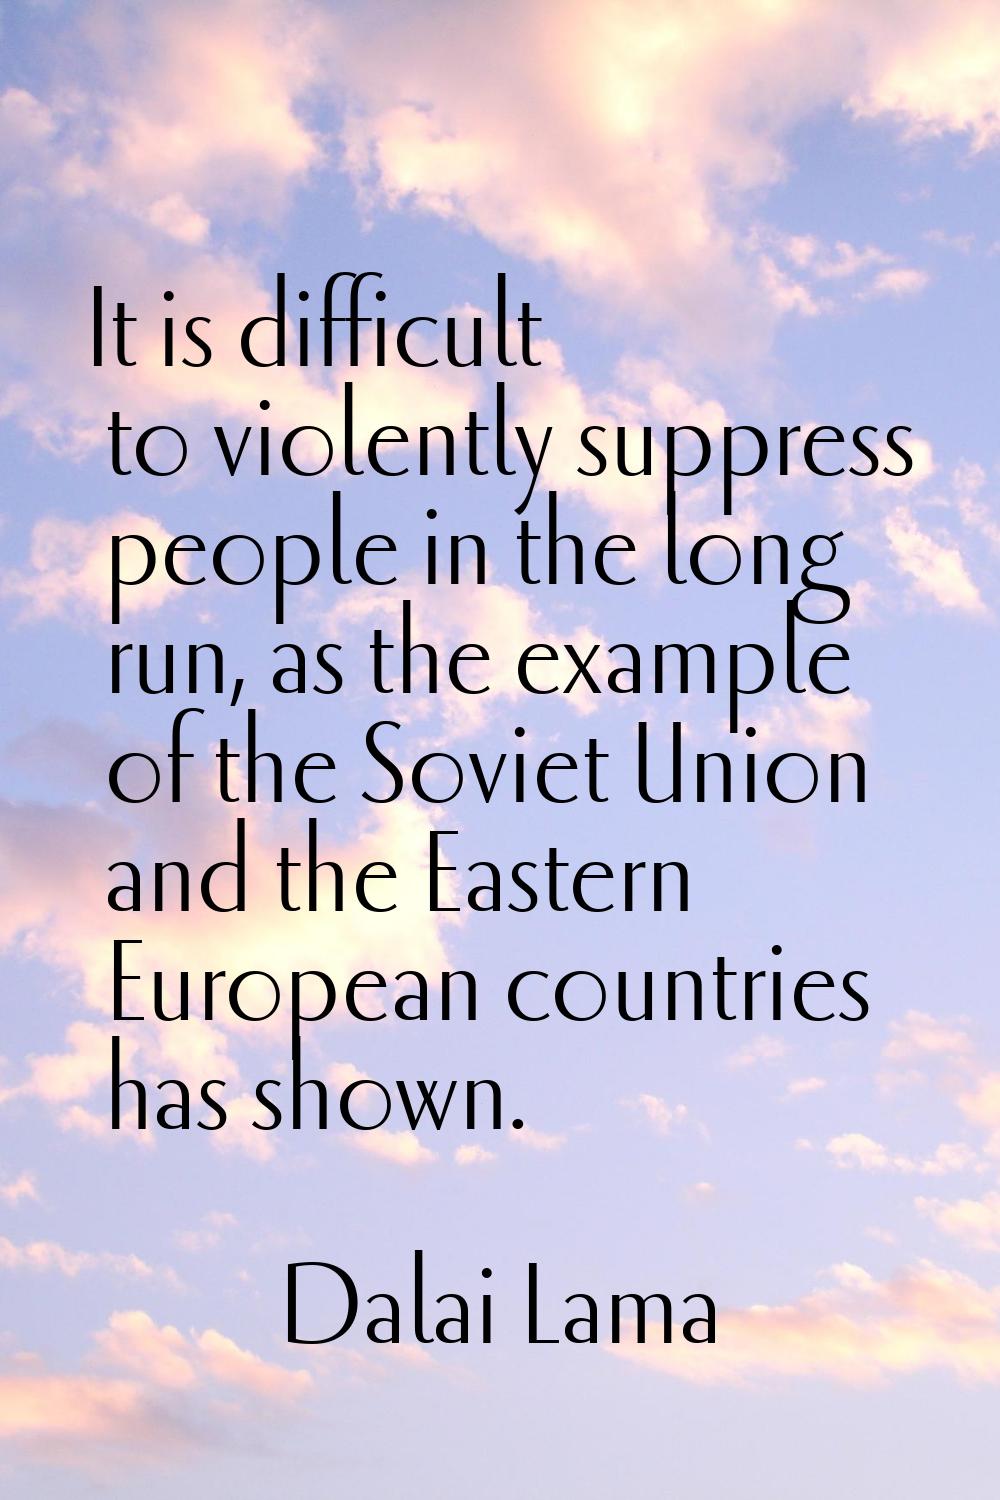 It is difficult to violently suppress people in the long run, as the example of the Soviet Union an